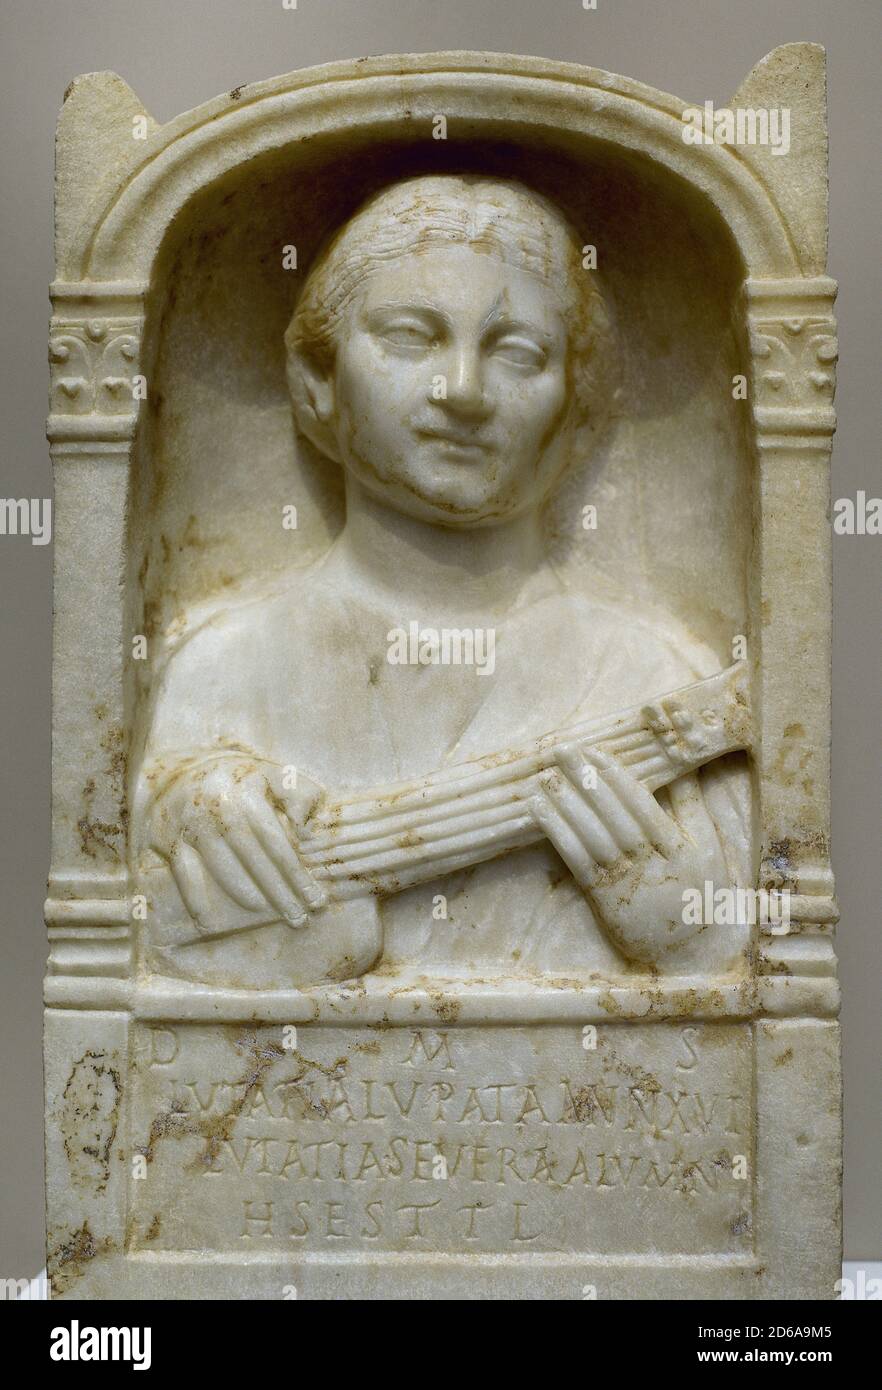 Roman era. Stele of Lutatia Lupata. The young Lutatia is depicted playing a stringed instrument, of the 'pandarium' type. The text gives us the name and age (16 years old) of the deceased, as well as the name of the dedicator Lutatia Severa. 60 x 36,50 cm. Marble. 2nd century AD. National Museum of Roman Art. Merida, Extremadura, Spain. Stock Photo